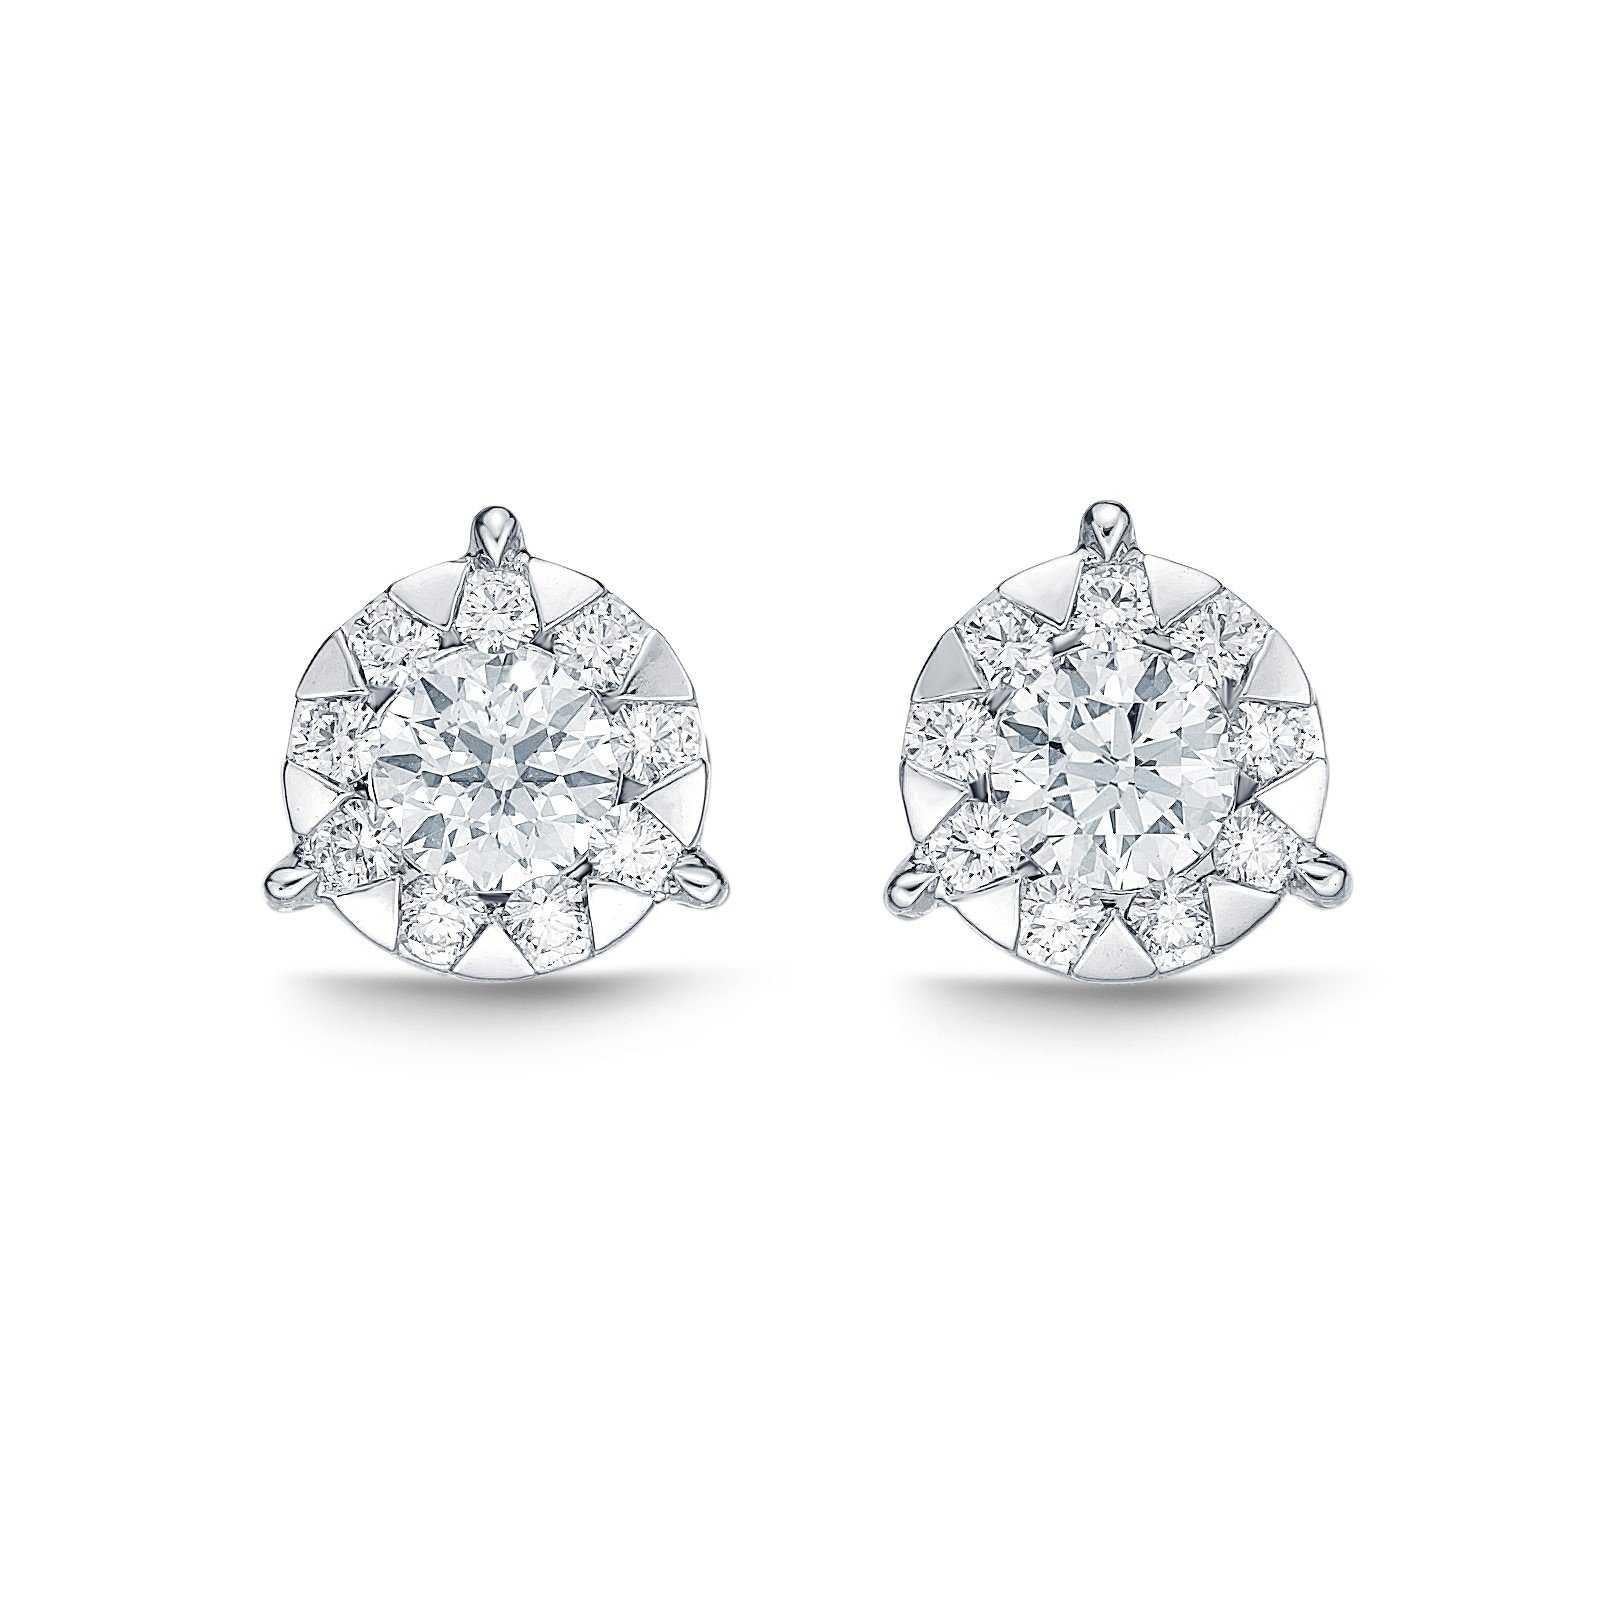 Modern Memoire Bouquet Collection Diamond Stud Earrings 1.33 ct with 